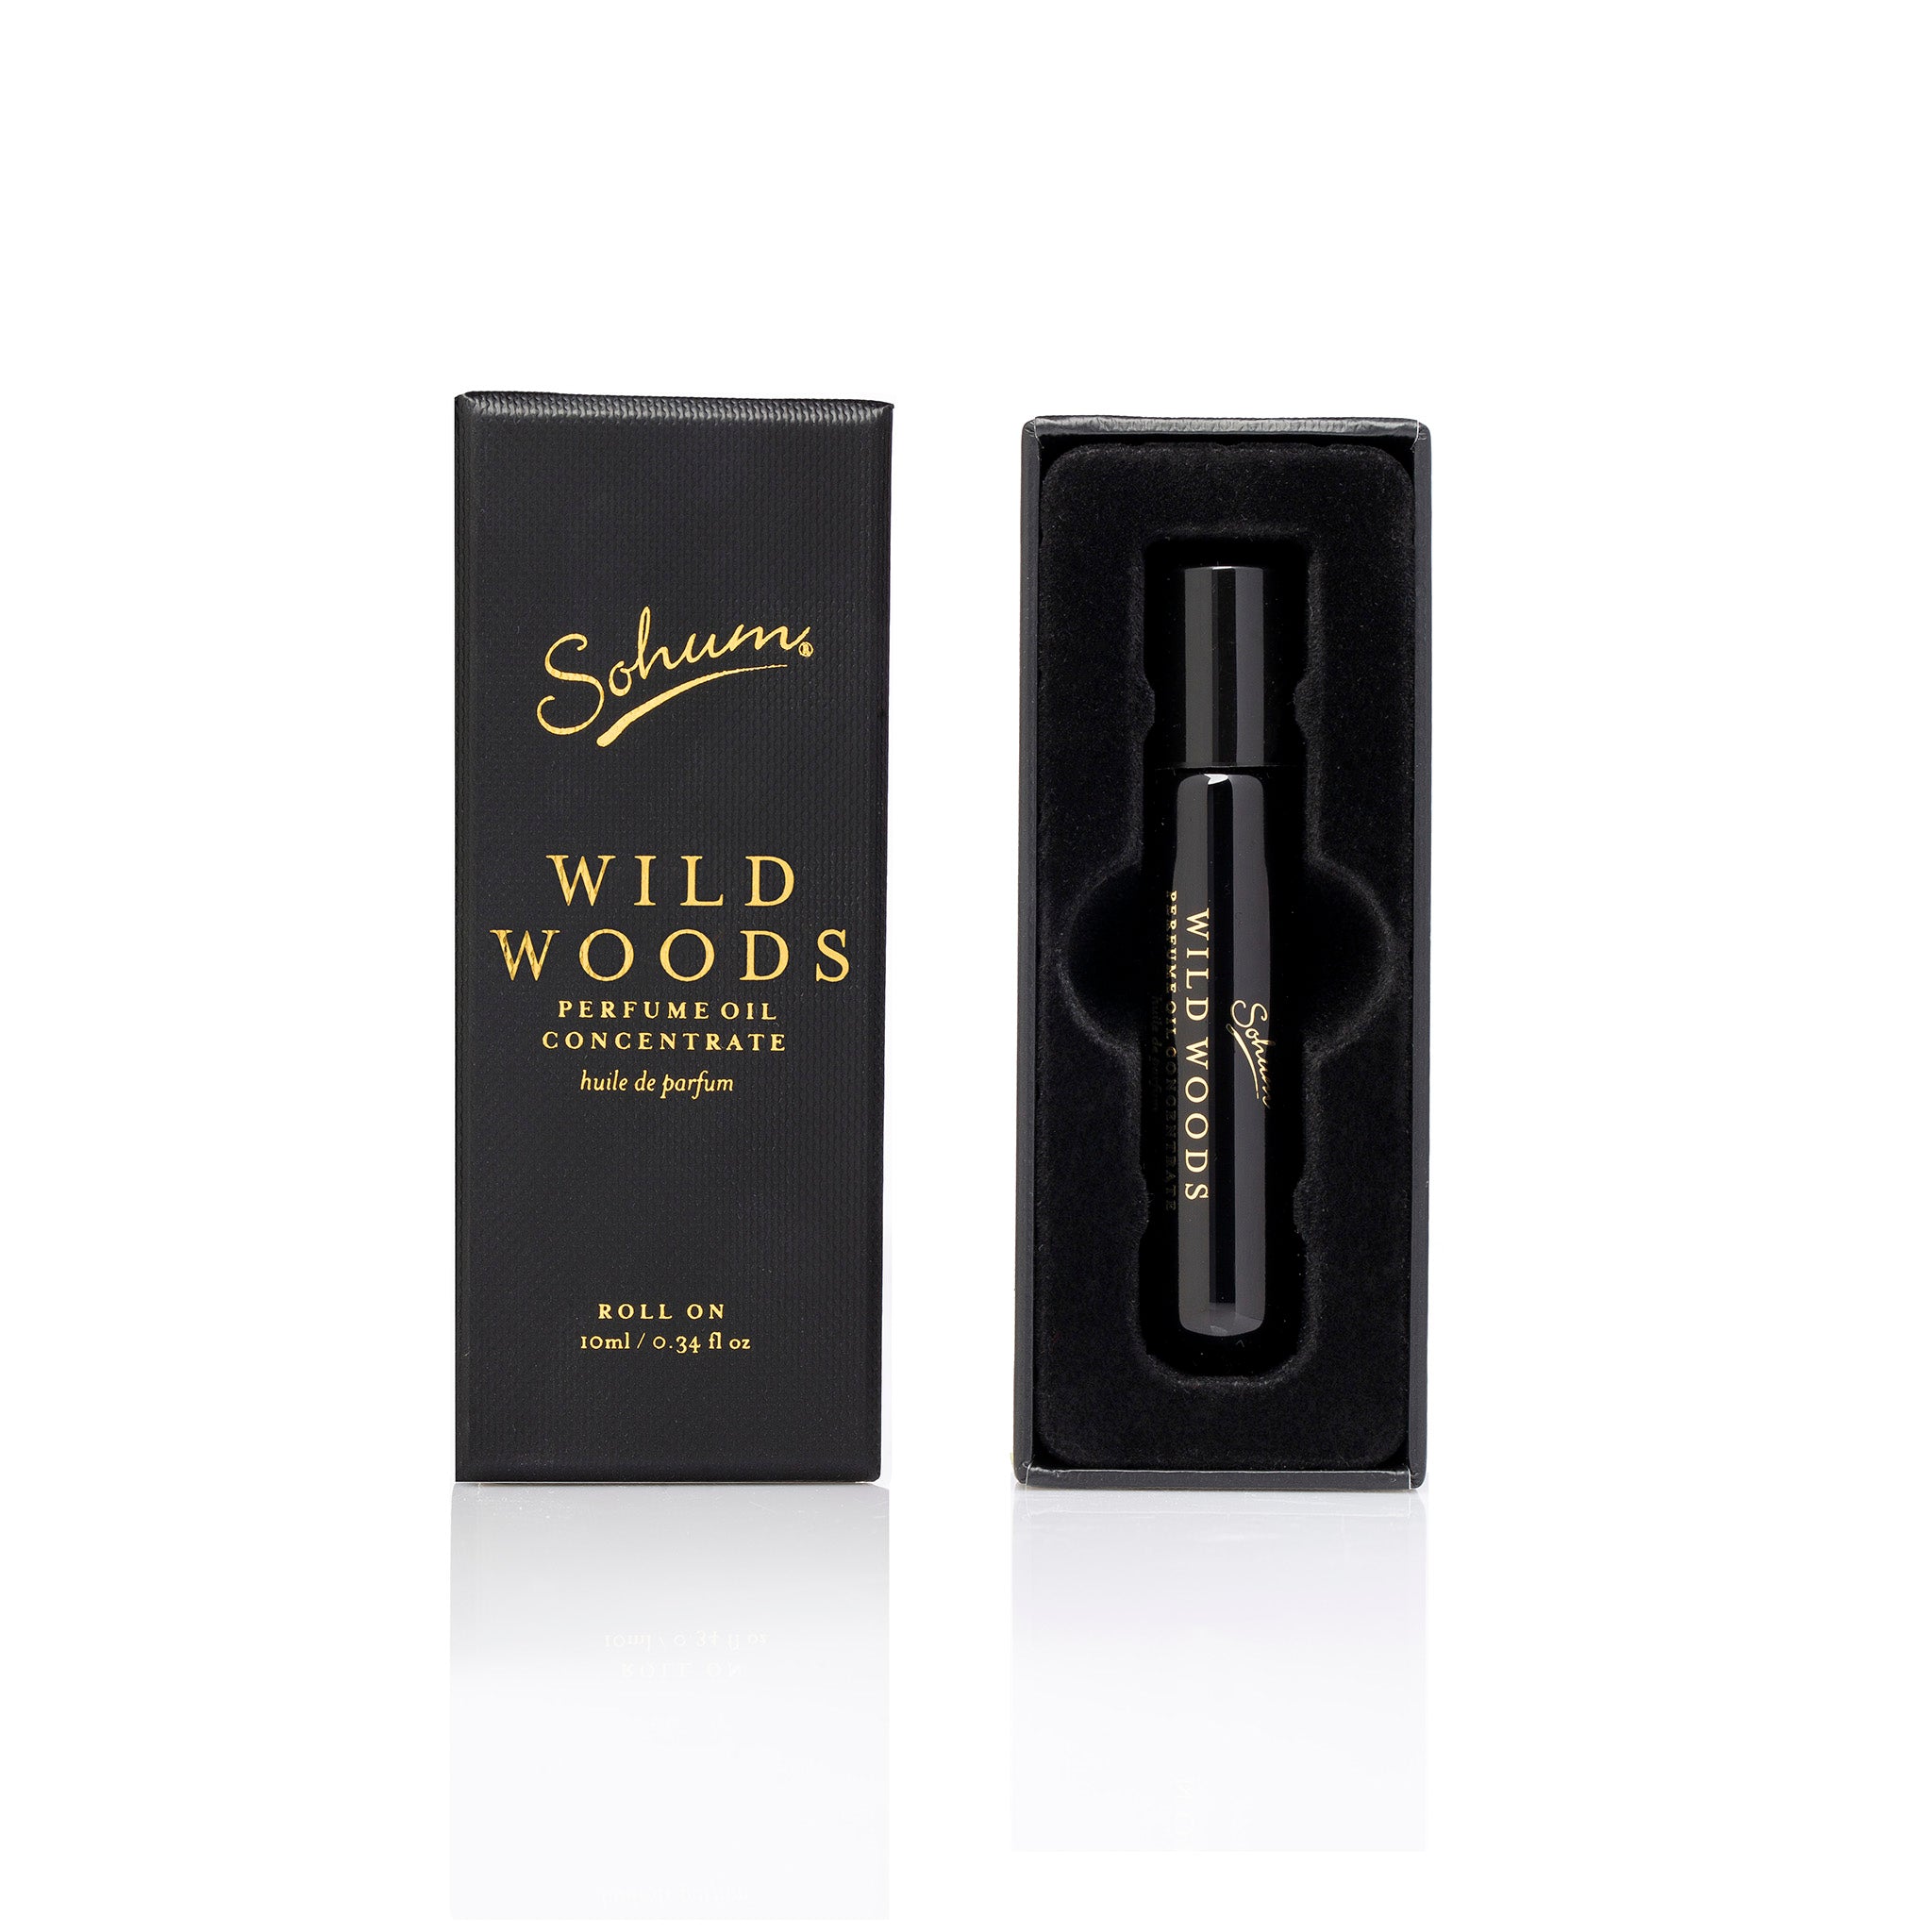 Wild Woods Perfume Oil Concentrate